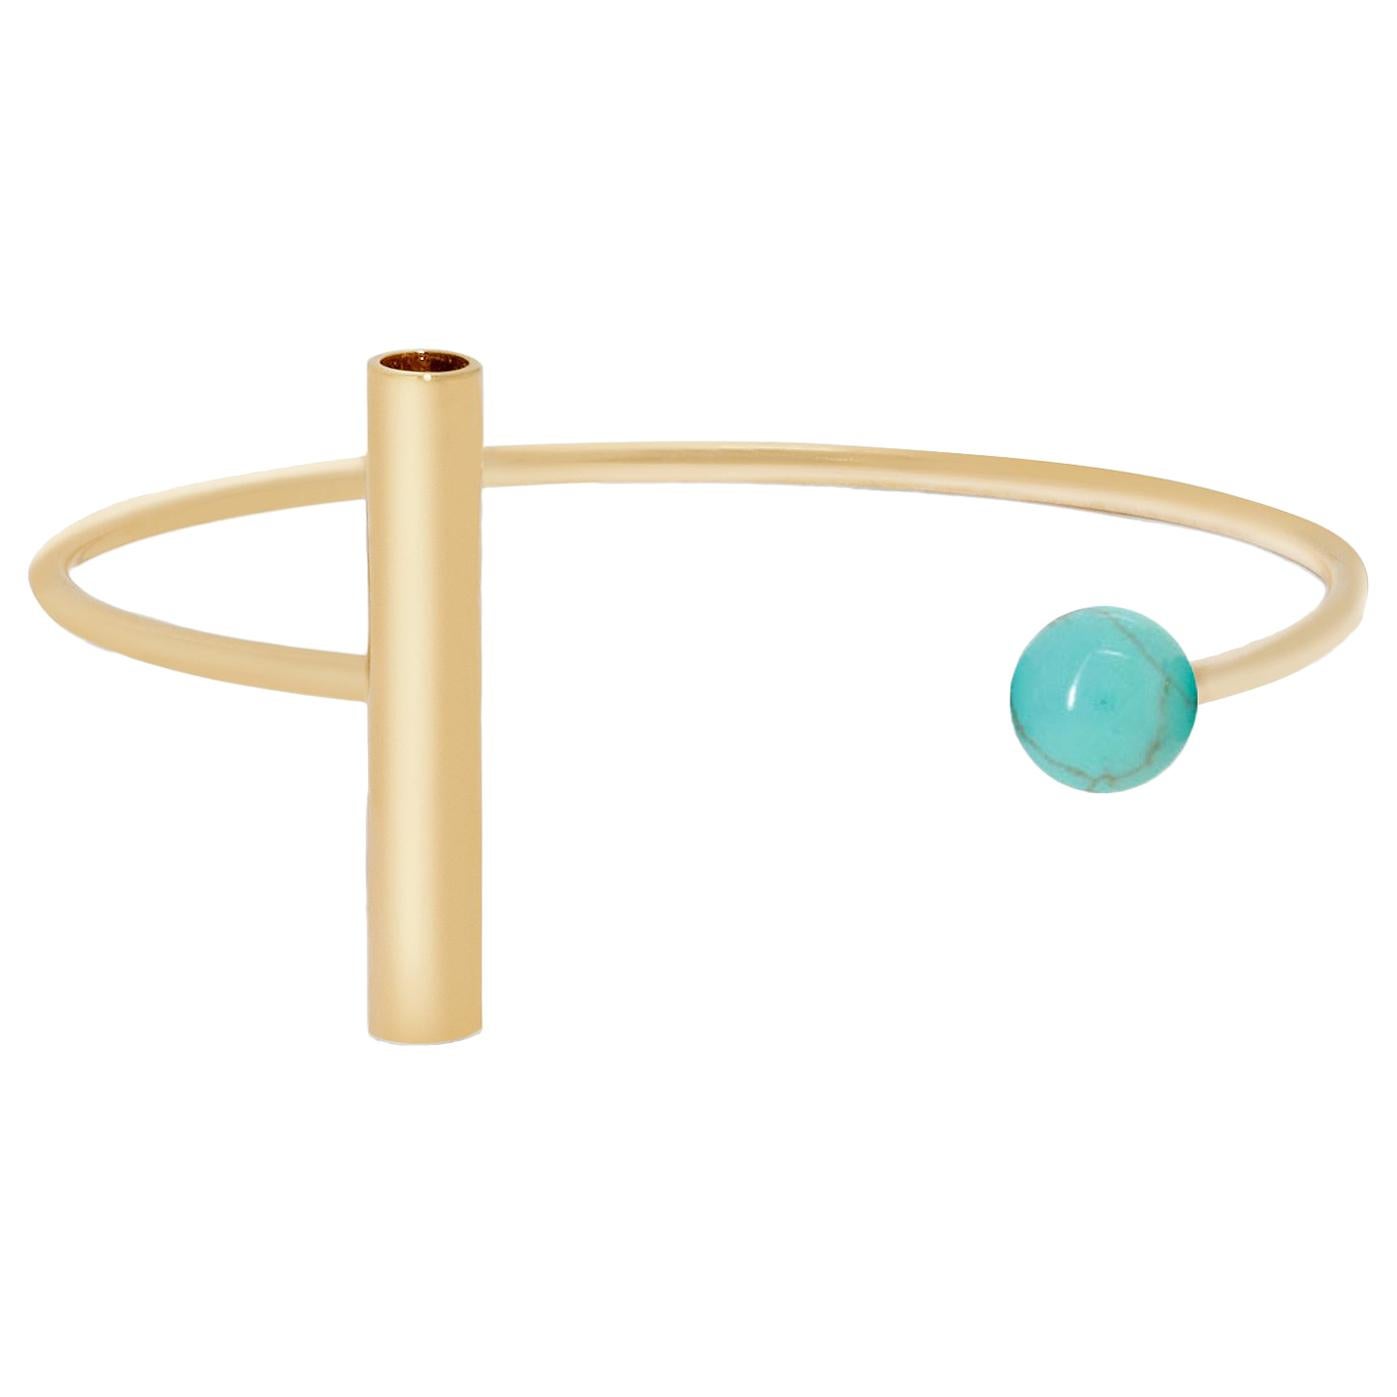 Geometric Cuff Bracelet in Gold Plate with Turquoise by Allison Bryan